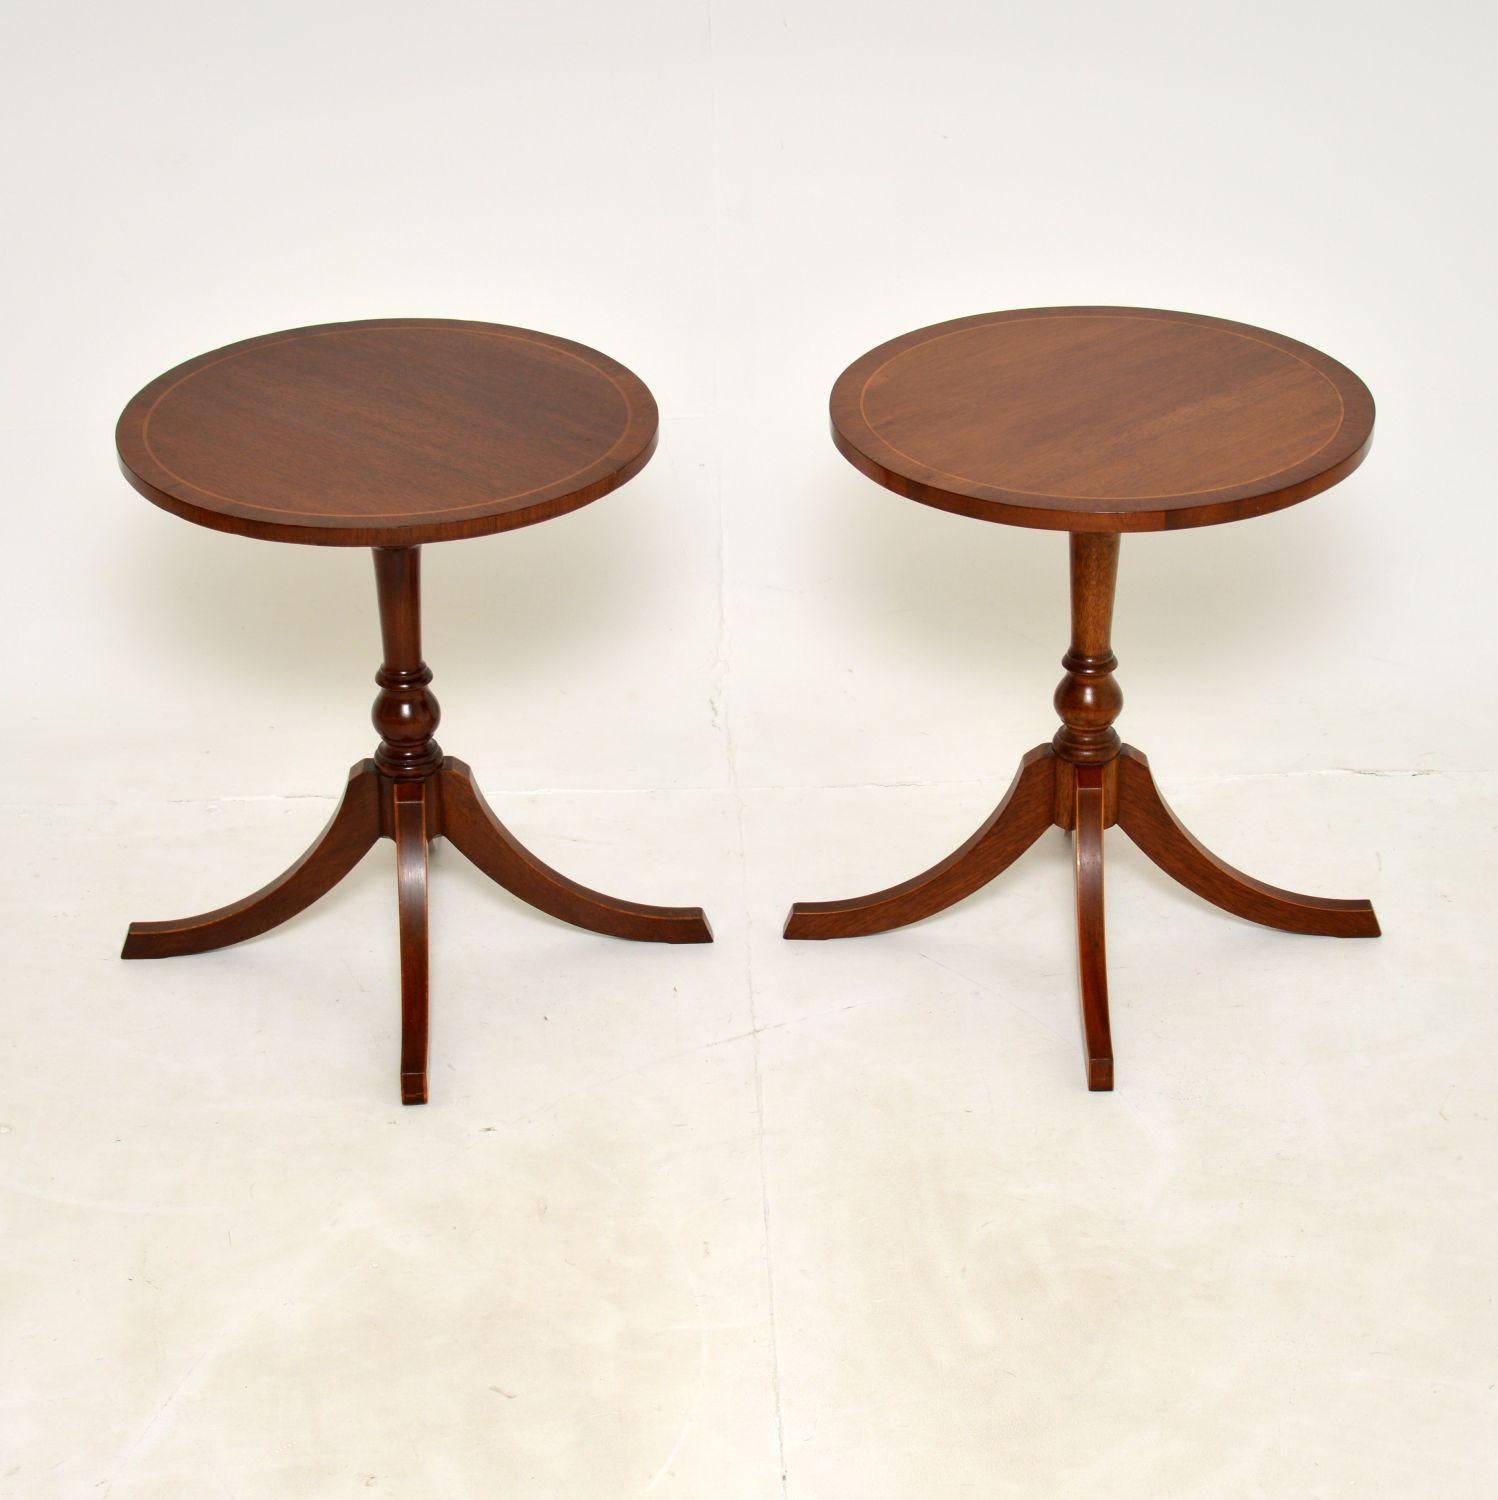 A lovely pair of inlaid wood wine tables with circular tops. These are in the antique Regency style, they were made in England and date from around the 1950’s.

The quality is fantastic, these are well built and have a very elegant design. The